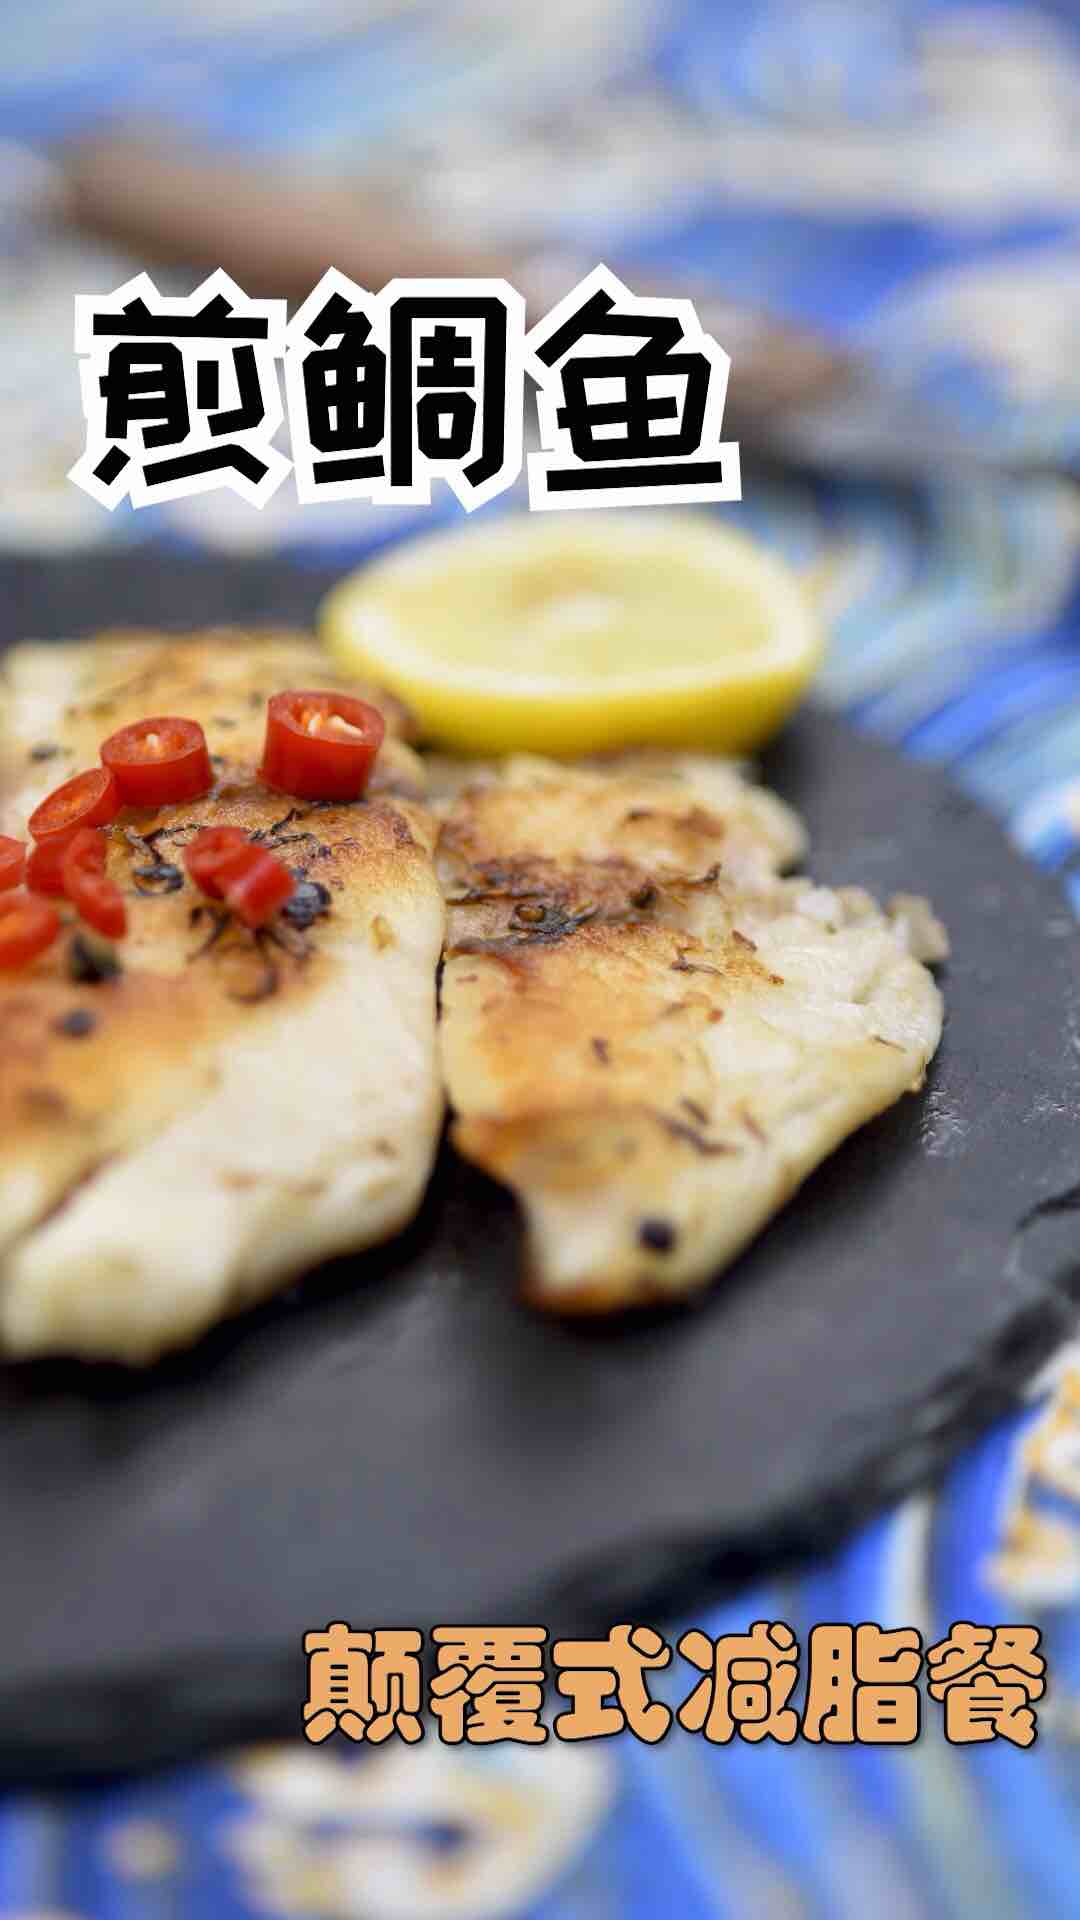 Pan-fried Sea Bream with Endless Aftertaste